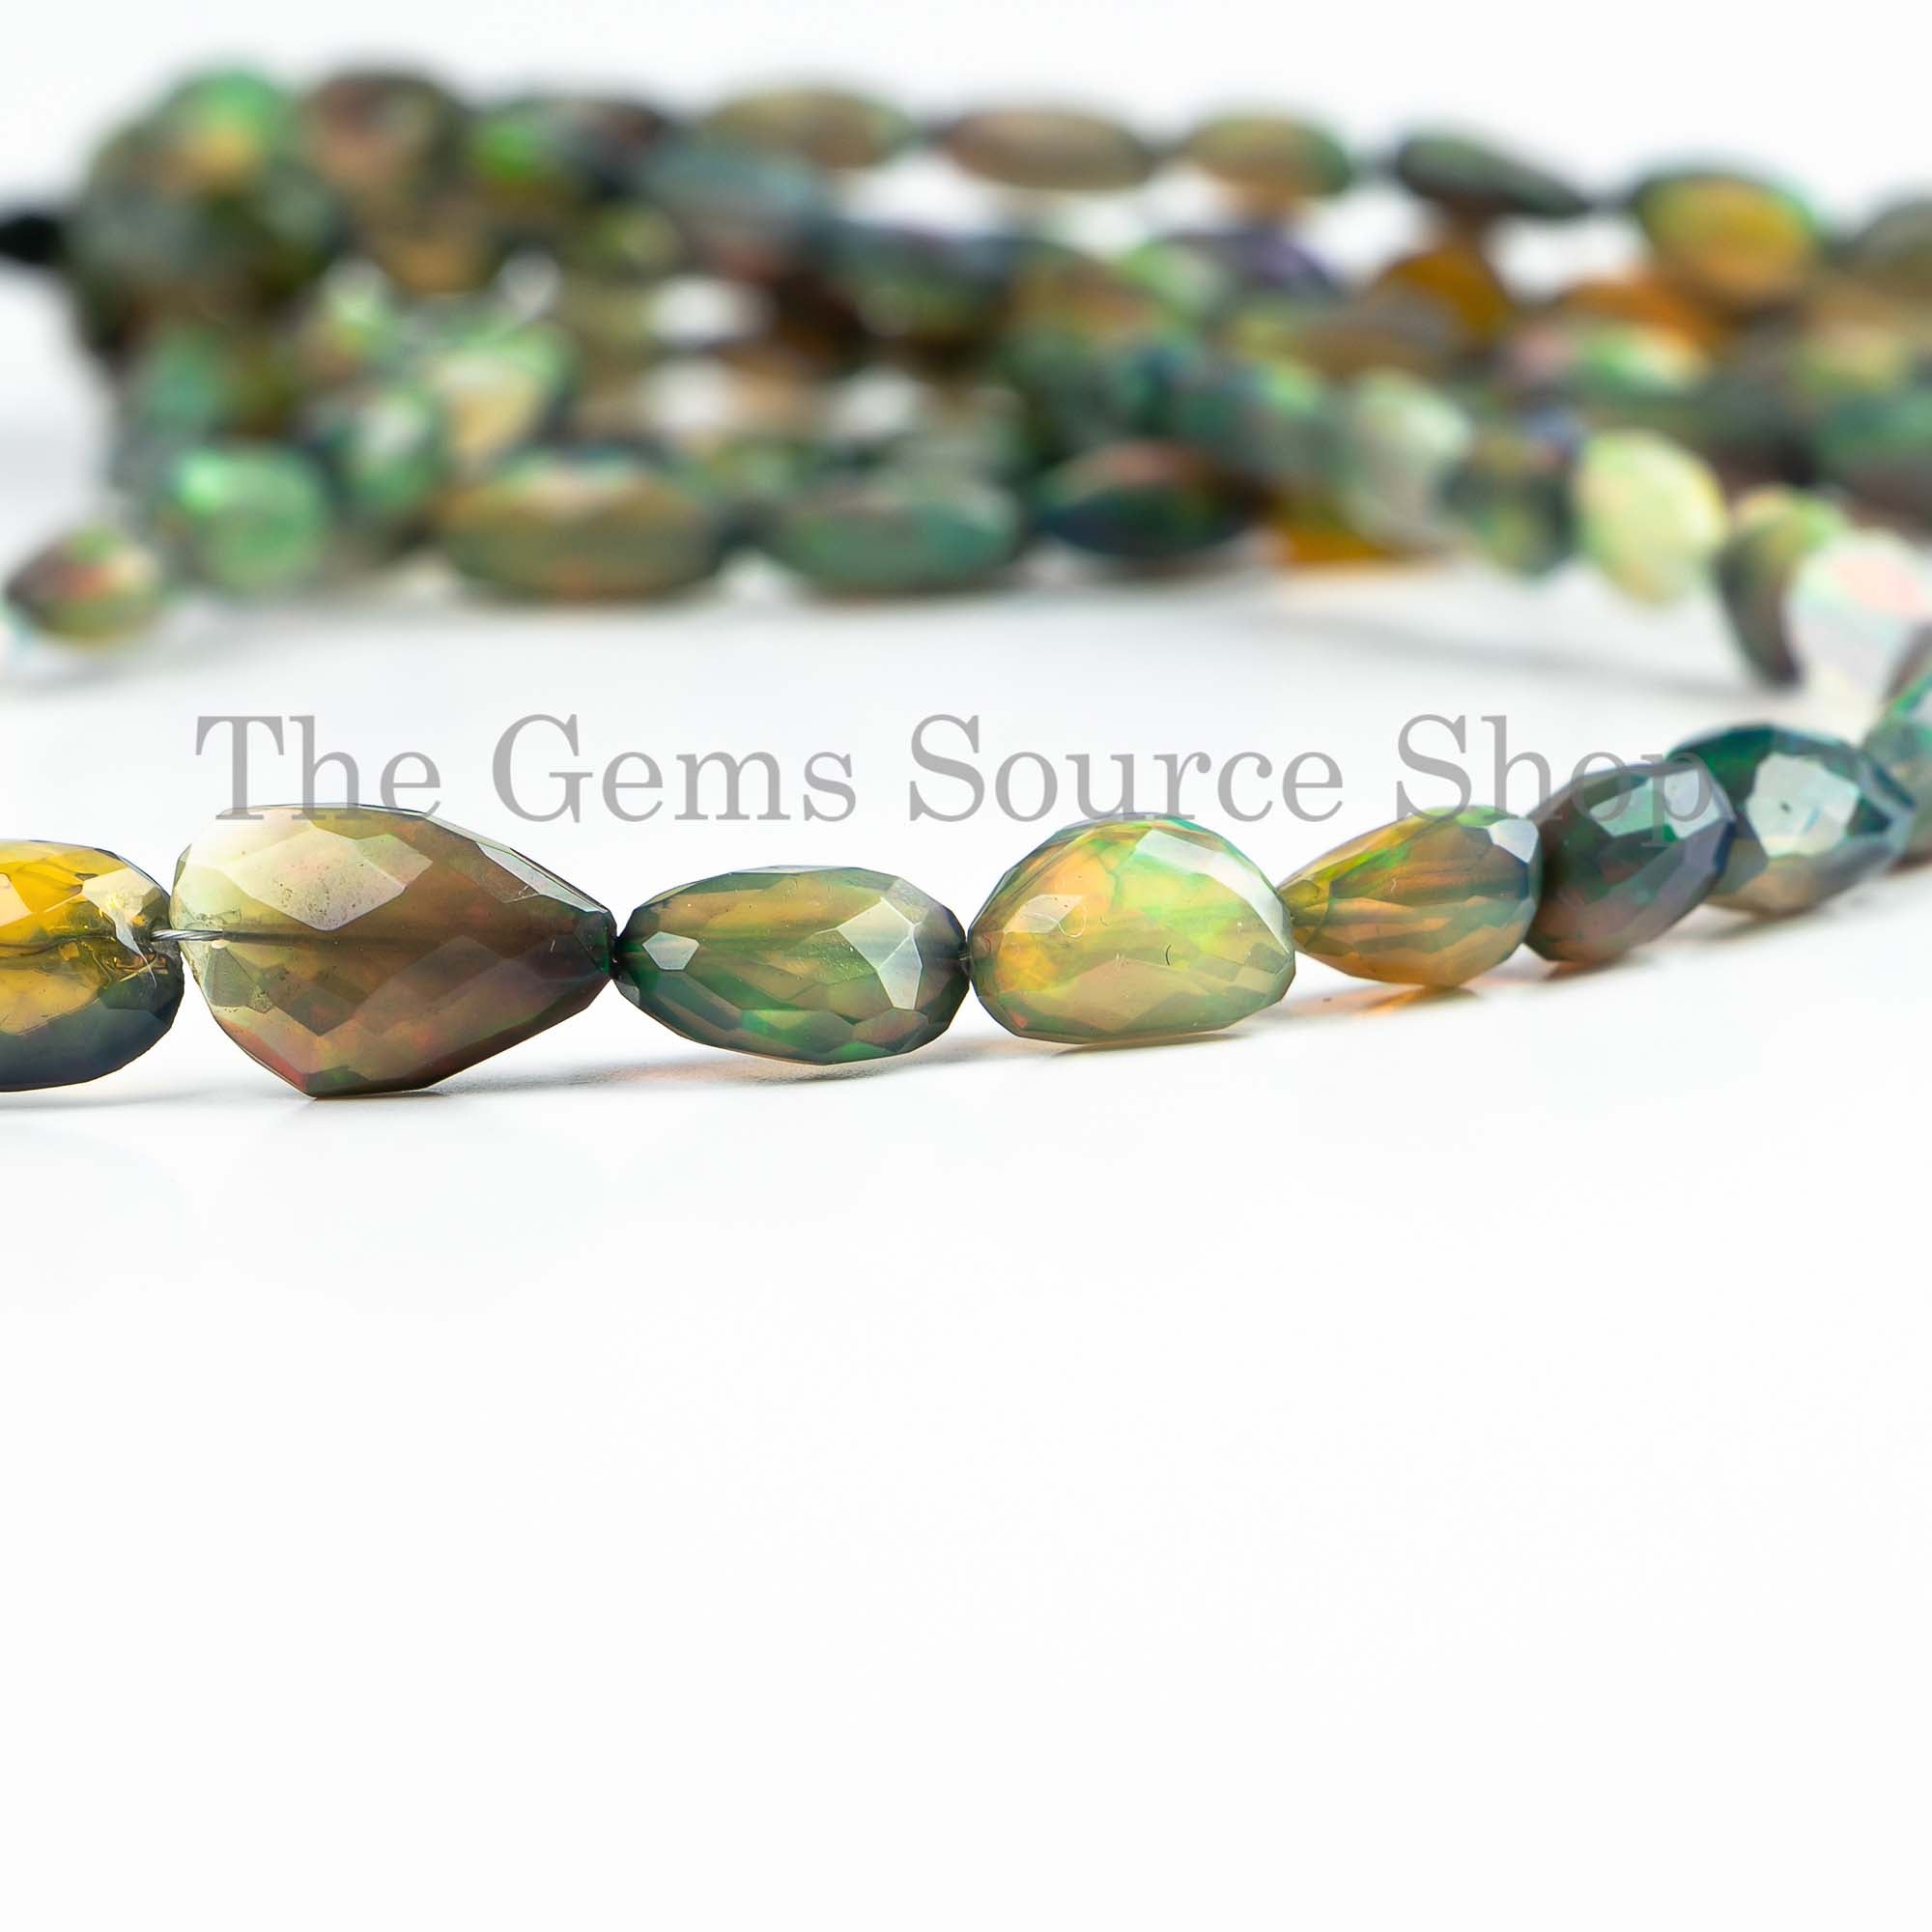 Disco Opal Faceted Nugget Beads, Disco Opal Nugget, Opal Faceted Nugget, Disco Opal Nugget Beads, Opal Beads, Opal Nugget, Nugget Beads